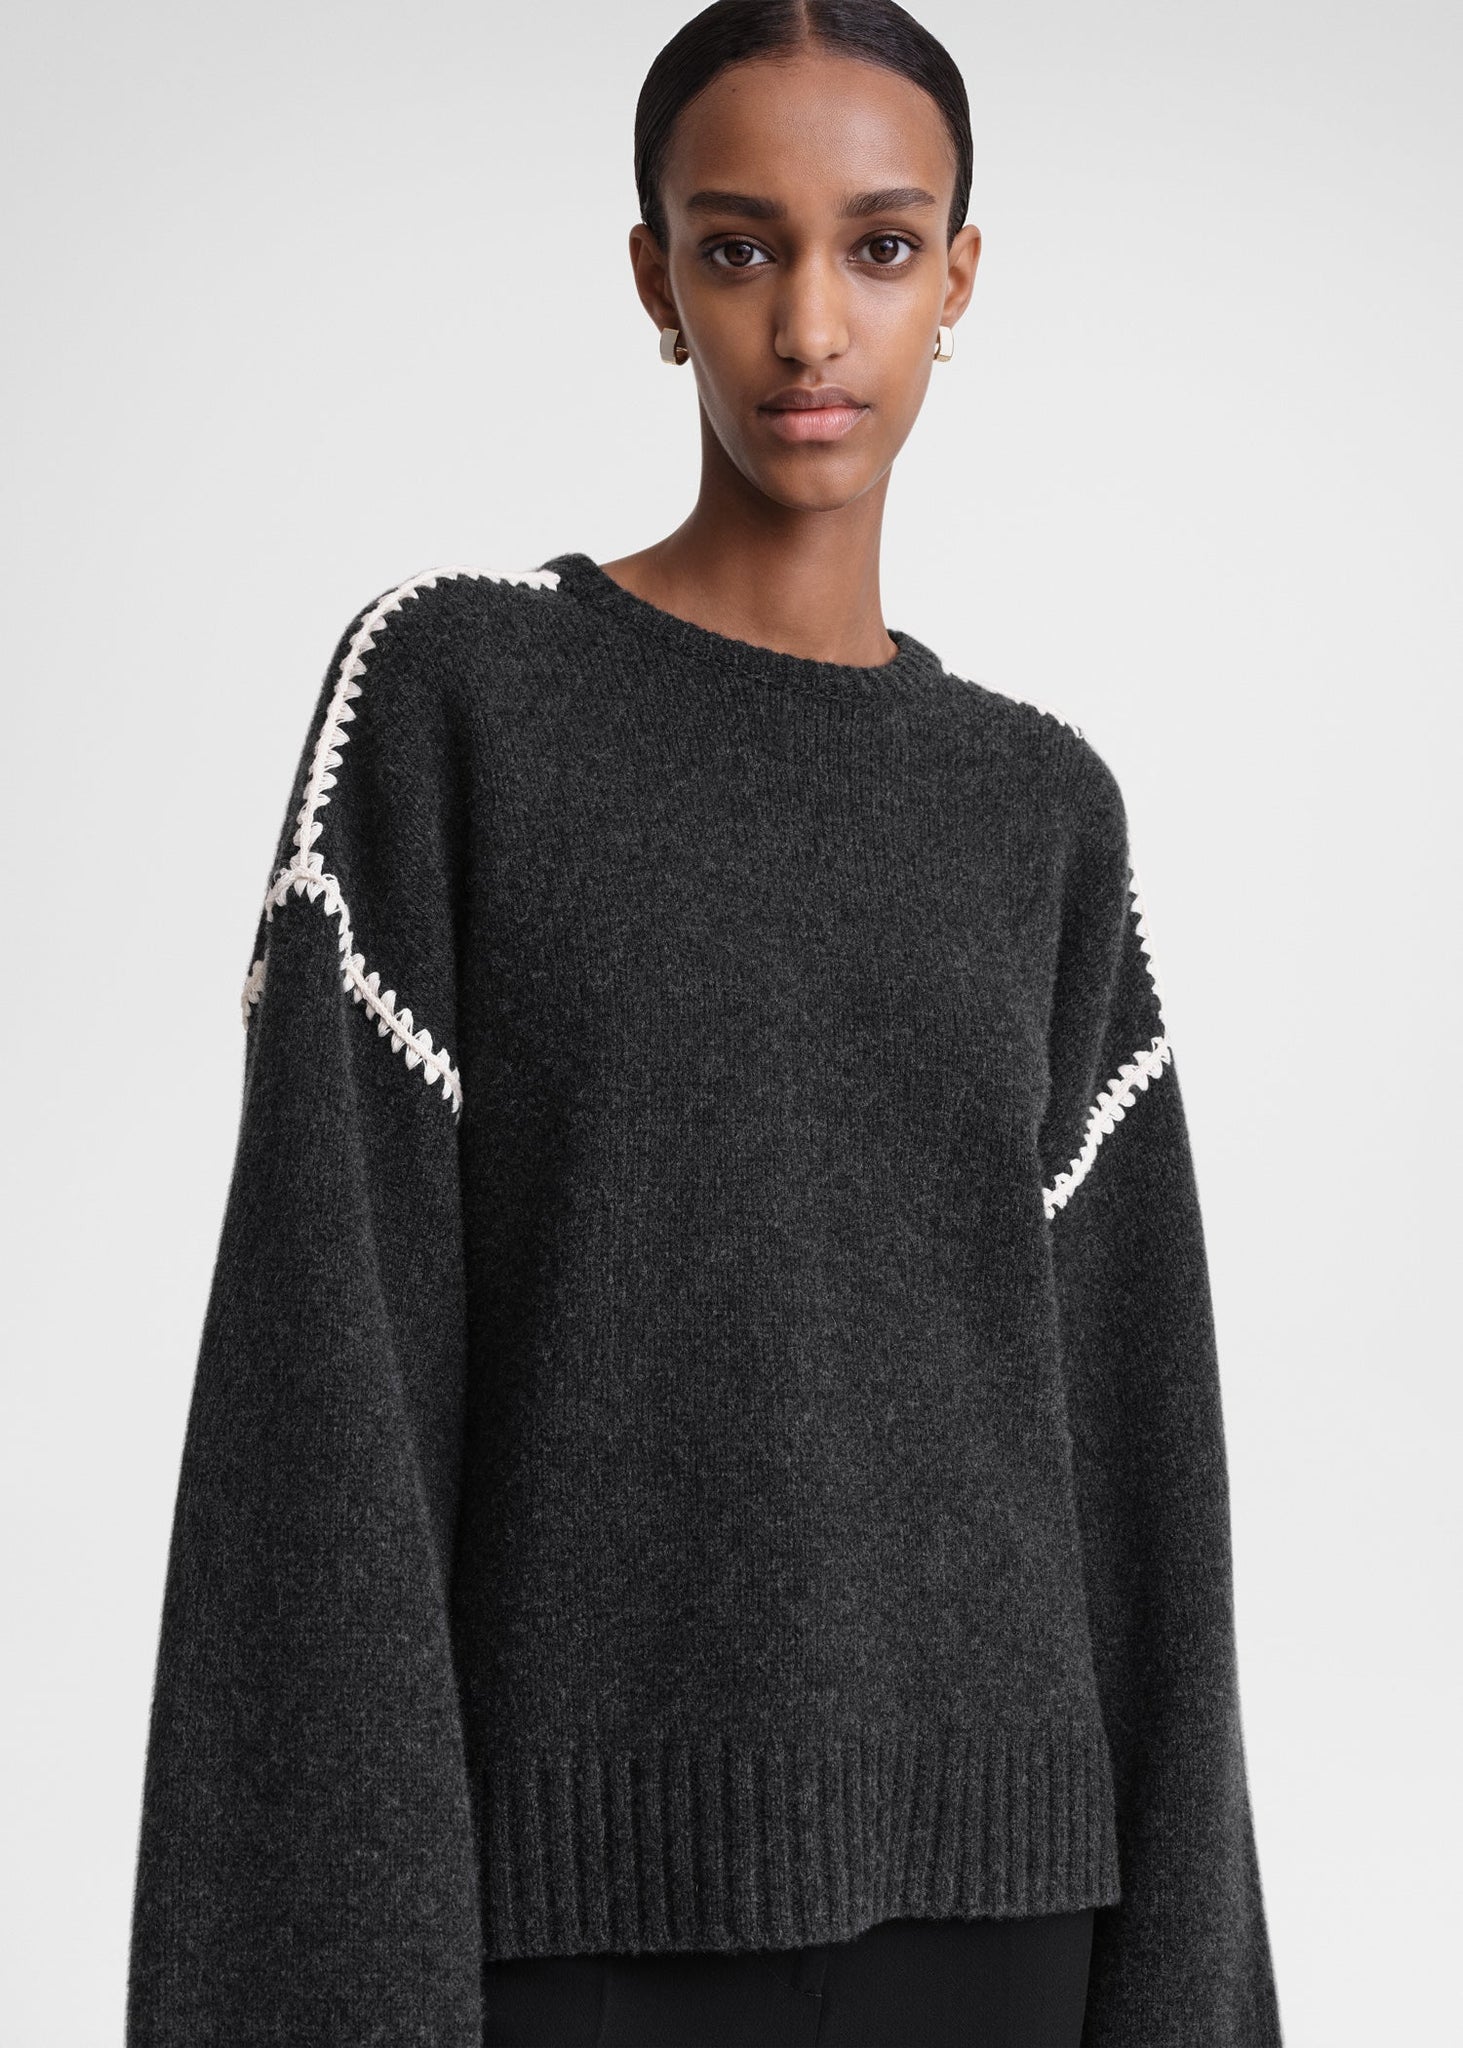 TOTEME STUDIO Embroidered Wool Cashmere Knit